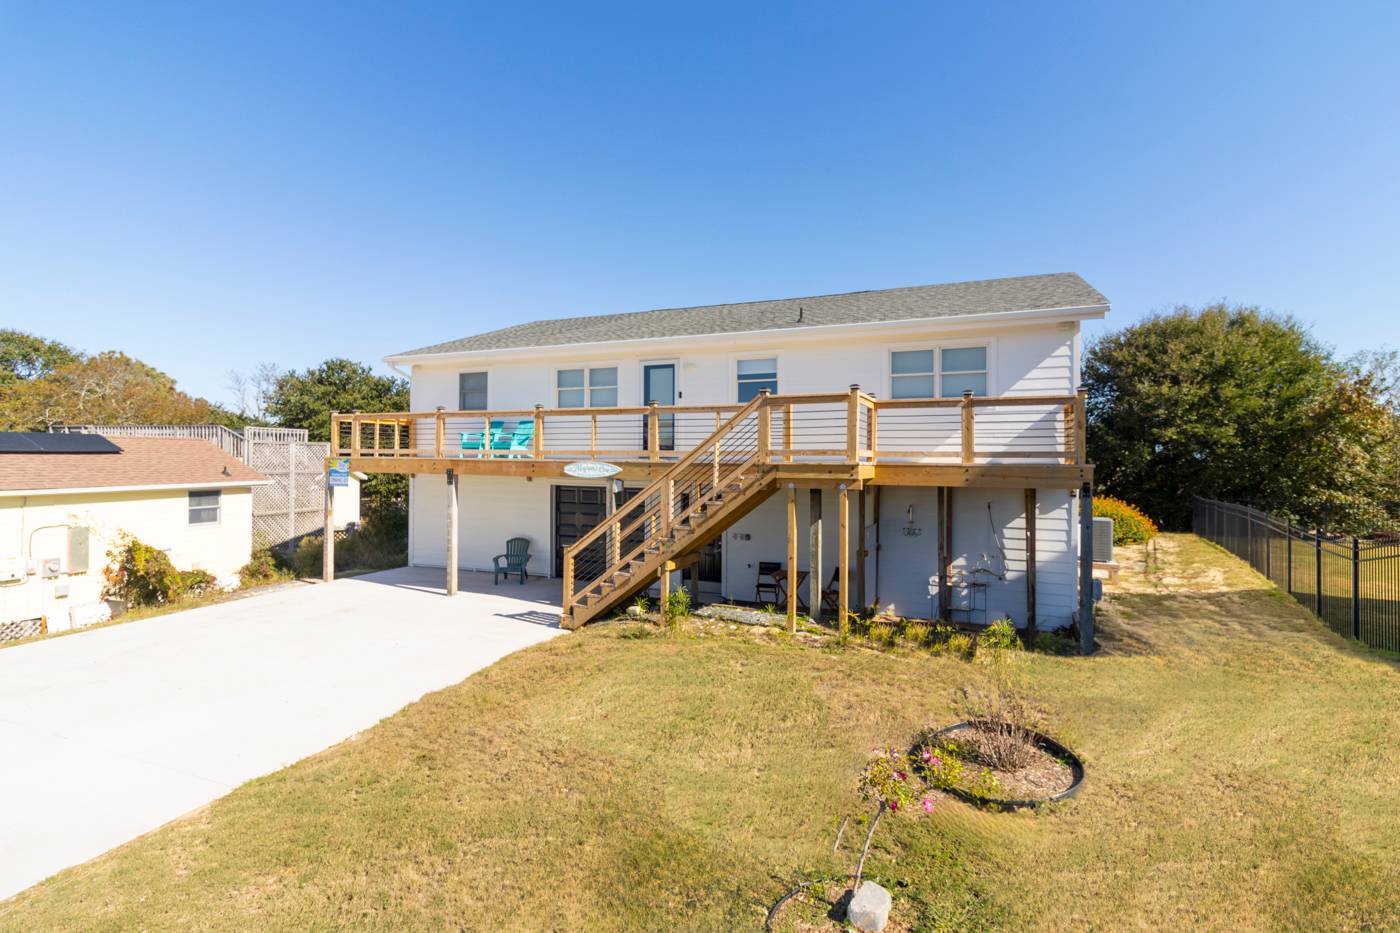 Sandpiper Cove - Vacation Rental in Surf City,NC